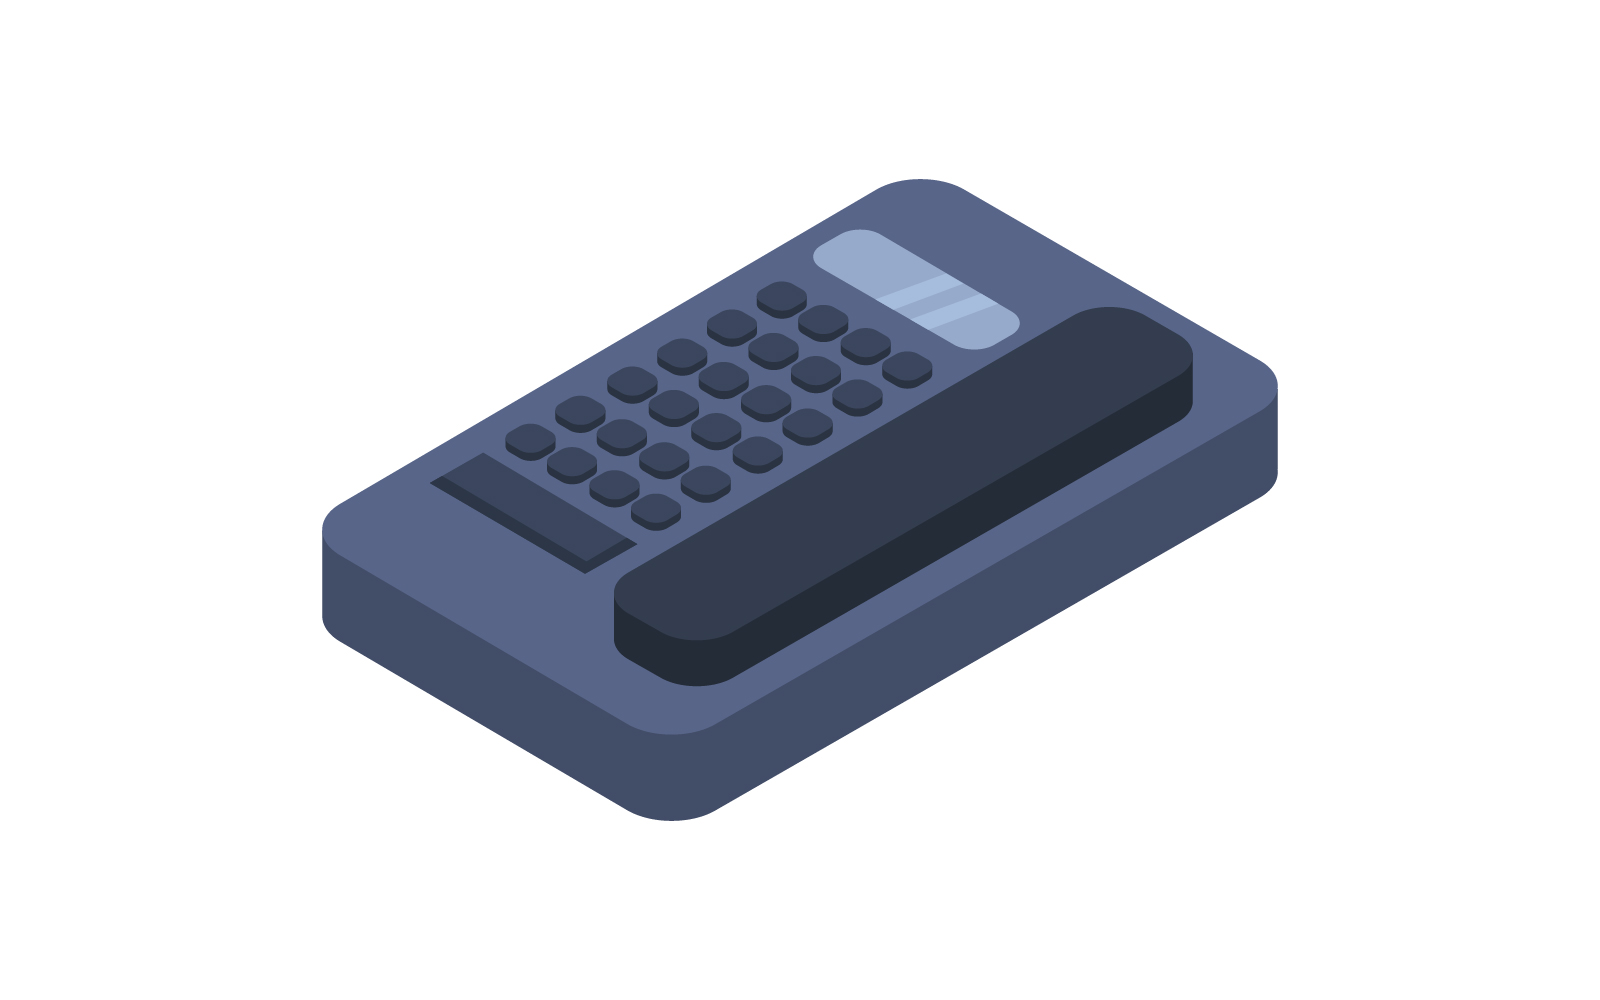 Isometric telephone illustrated in vector on background